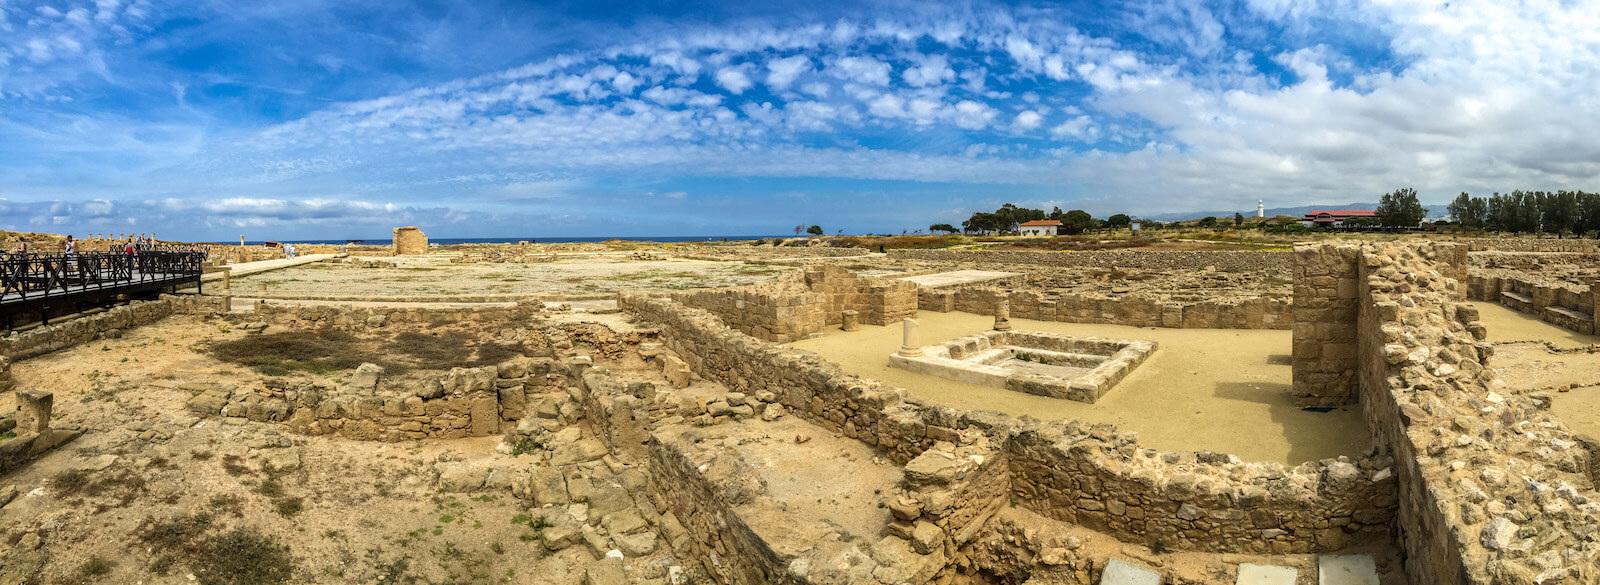 history of paphos